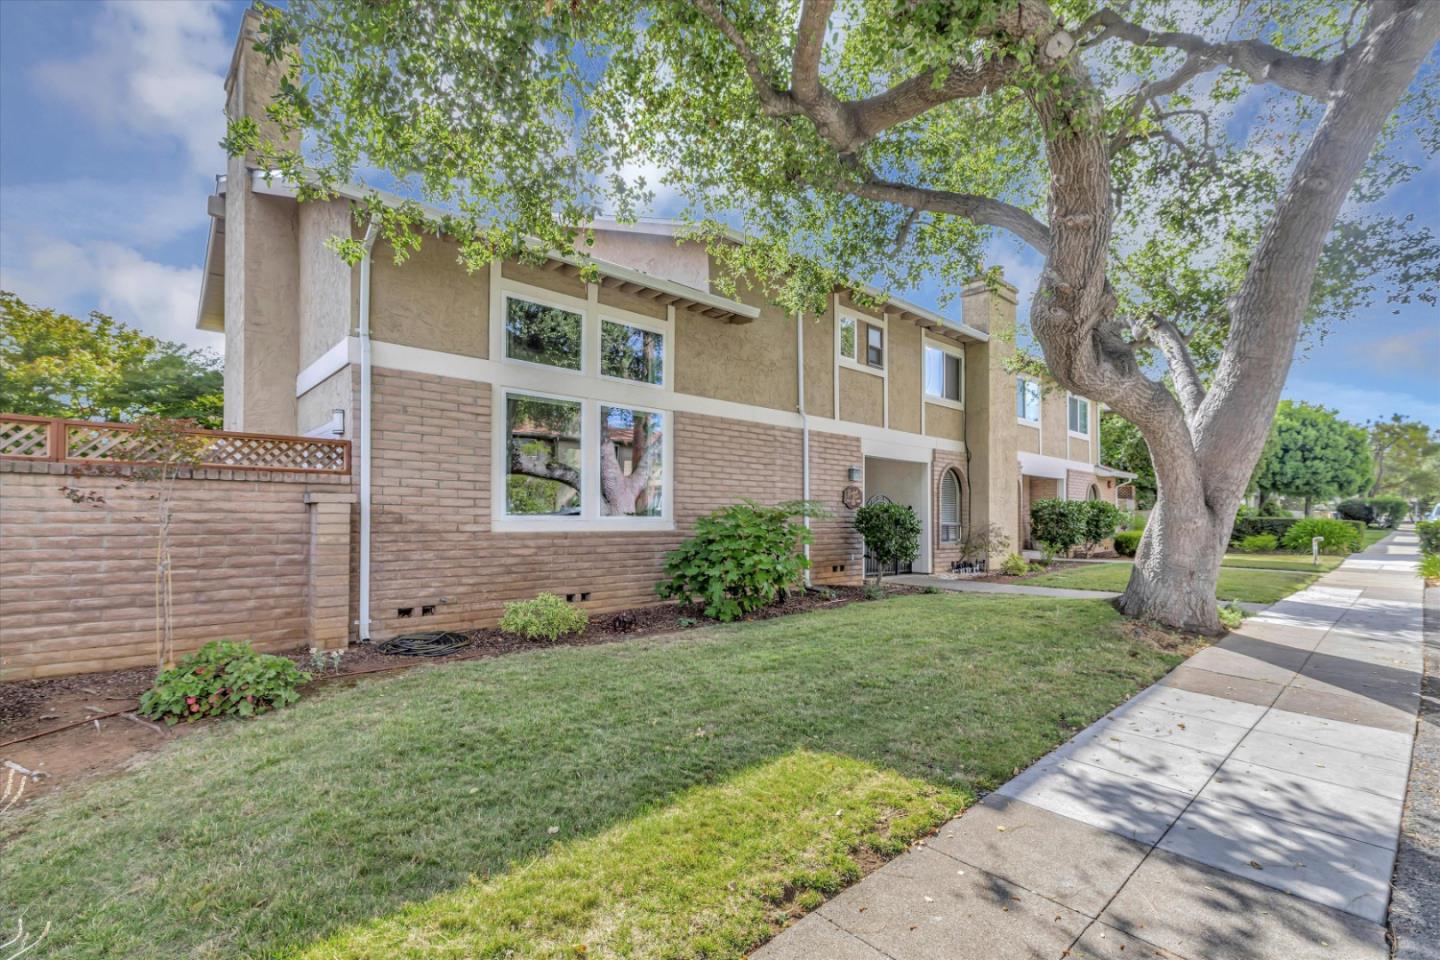 Unique, well maintained TH style condo in a quiet downtown Los Altos neighborhood.  This 3BR, 3BA, 2,024 sq ft unit has dramatic vaulted ceilings in the living room and primary suite w/ multiple large windows that provide an abundance of natural light. Features include a beautiful designer kitchen and separate dining room with custom lighting.  The spacious living room w/ fireplace and dining room open to a quiet, private patio with custom deck, bench, gas firepit, enclosure for TV, and BBQ area. Great for entertaining!  The ground floor includes a remodeled full bathroom and bright bedroom with a sliding glass door leading to a private courtyard. Can also be used as an office or family room. Upstairs features an expansive primary suite with fireplace, private bath, and walk-in closet plus a laundry room and third bedroom w/ ensuite bathroom. New windows and glass doors throughout, central A/C and heat, and large detached 2-car garage. Enjoy all that downtown Los Altos has to offer!